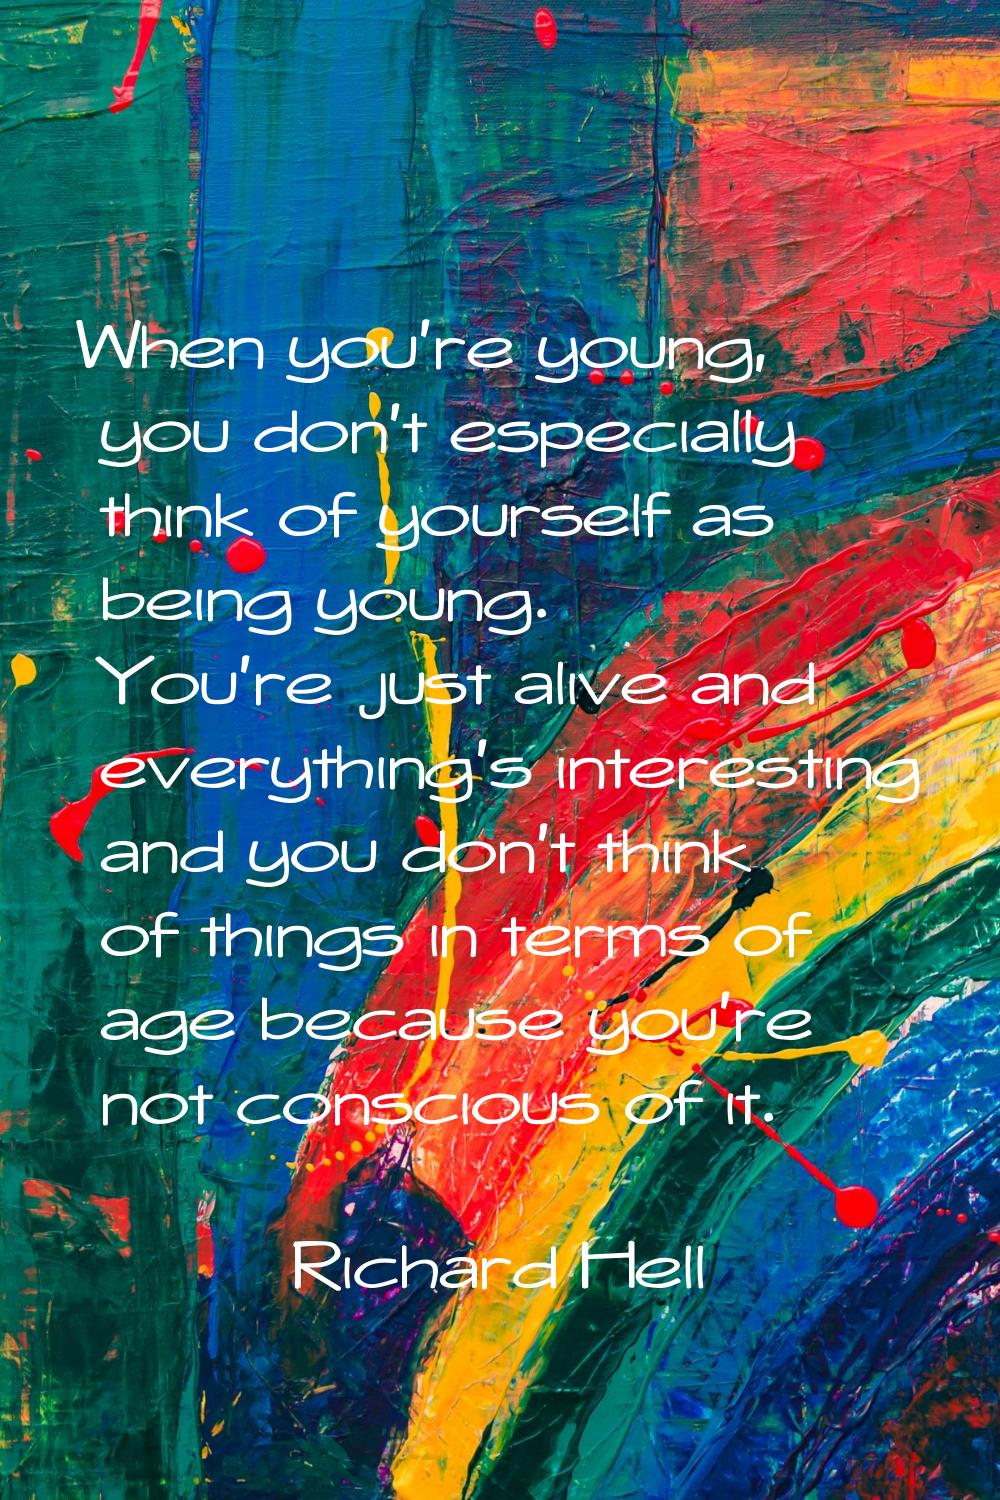 When you're young, you don't especially think of yourself as being young. You're just alive and eve